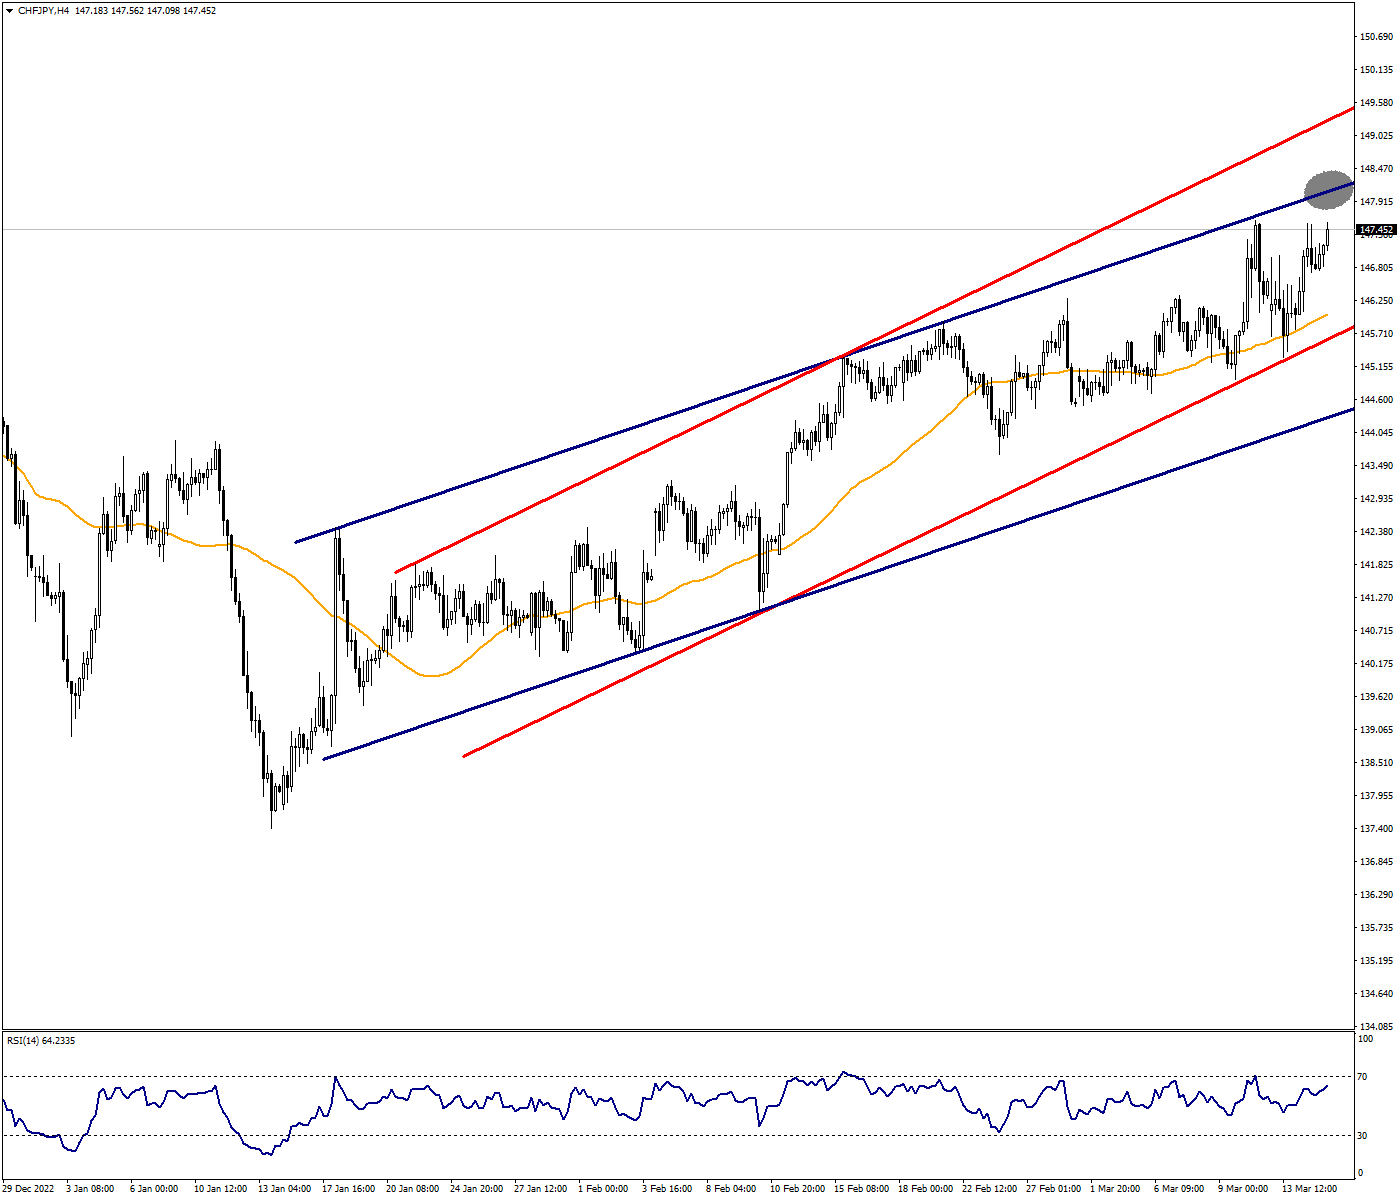 Watching 148.10 Resistance On CHFJPY